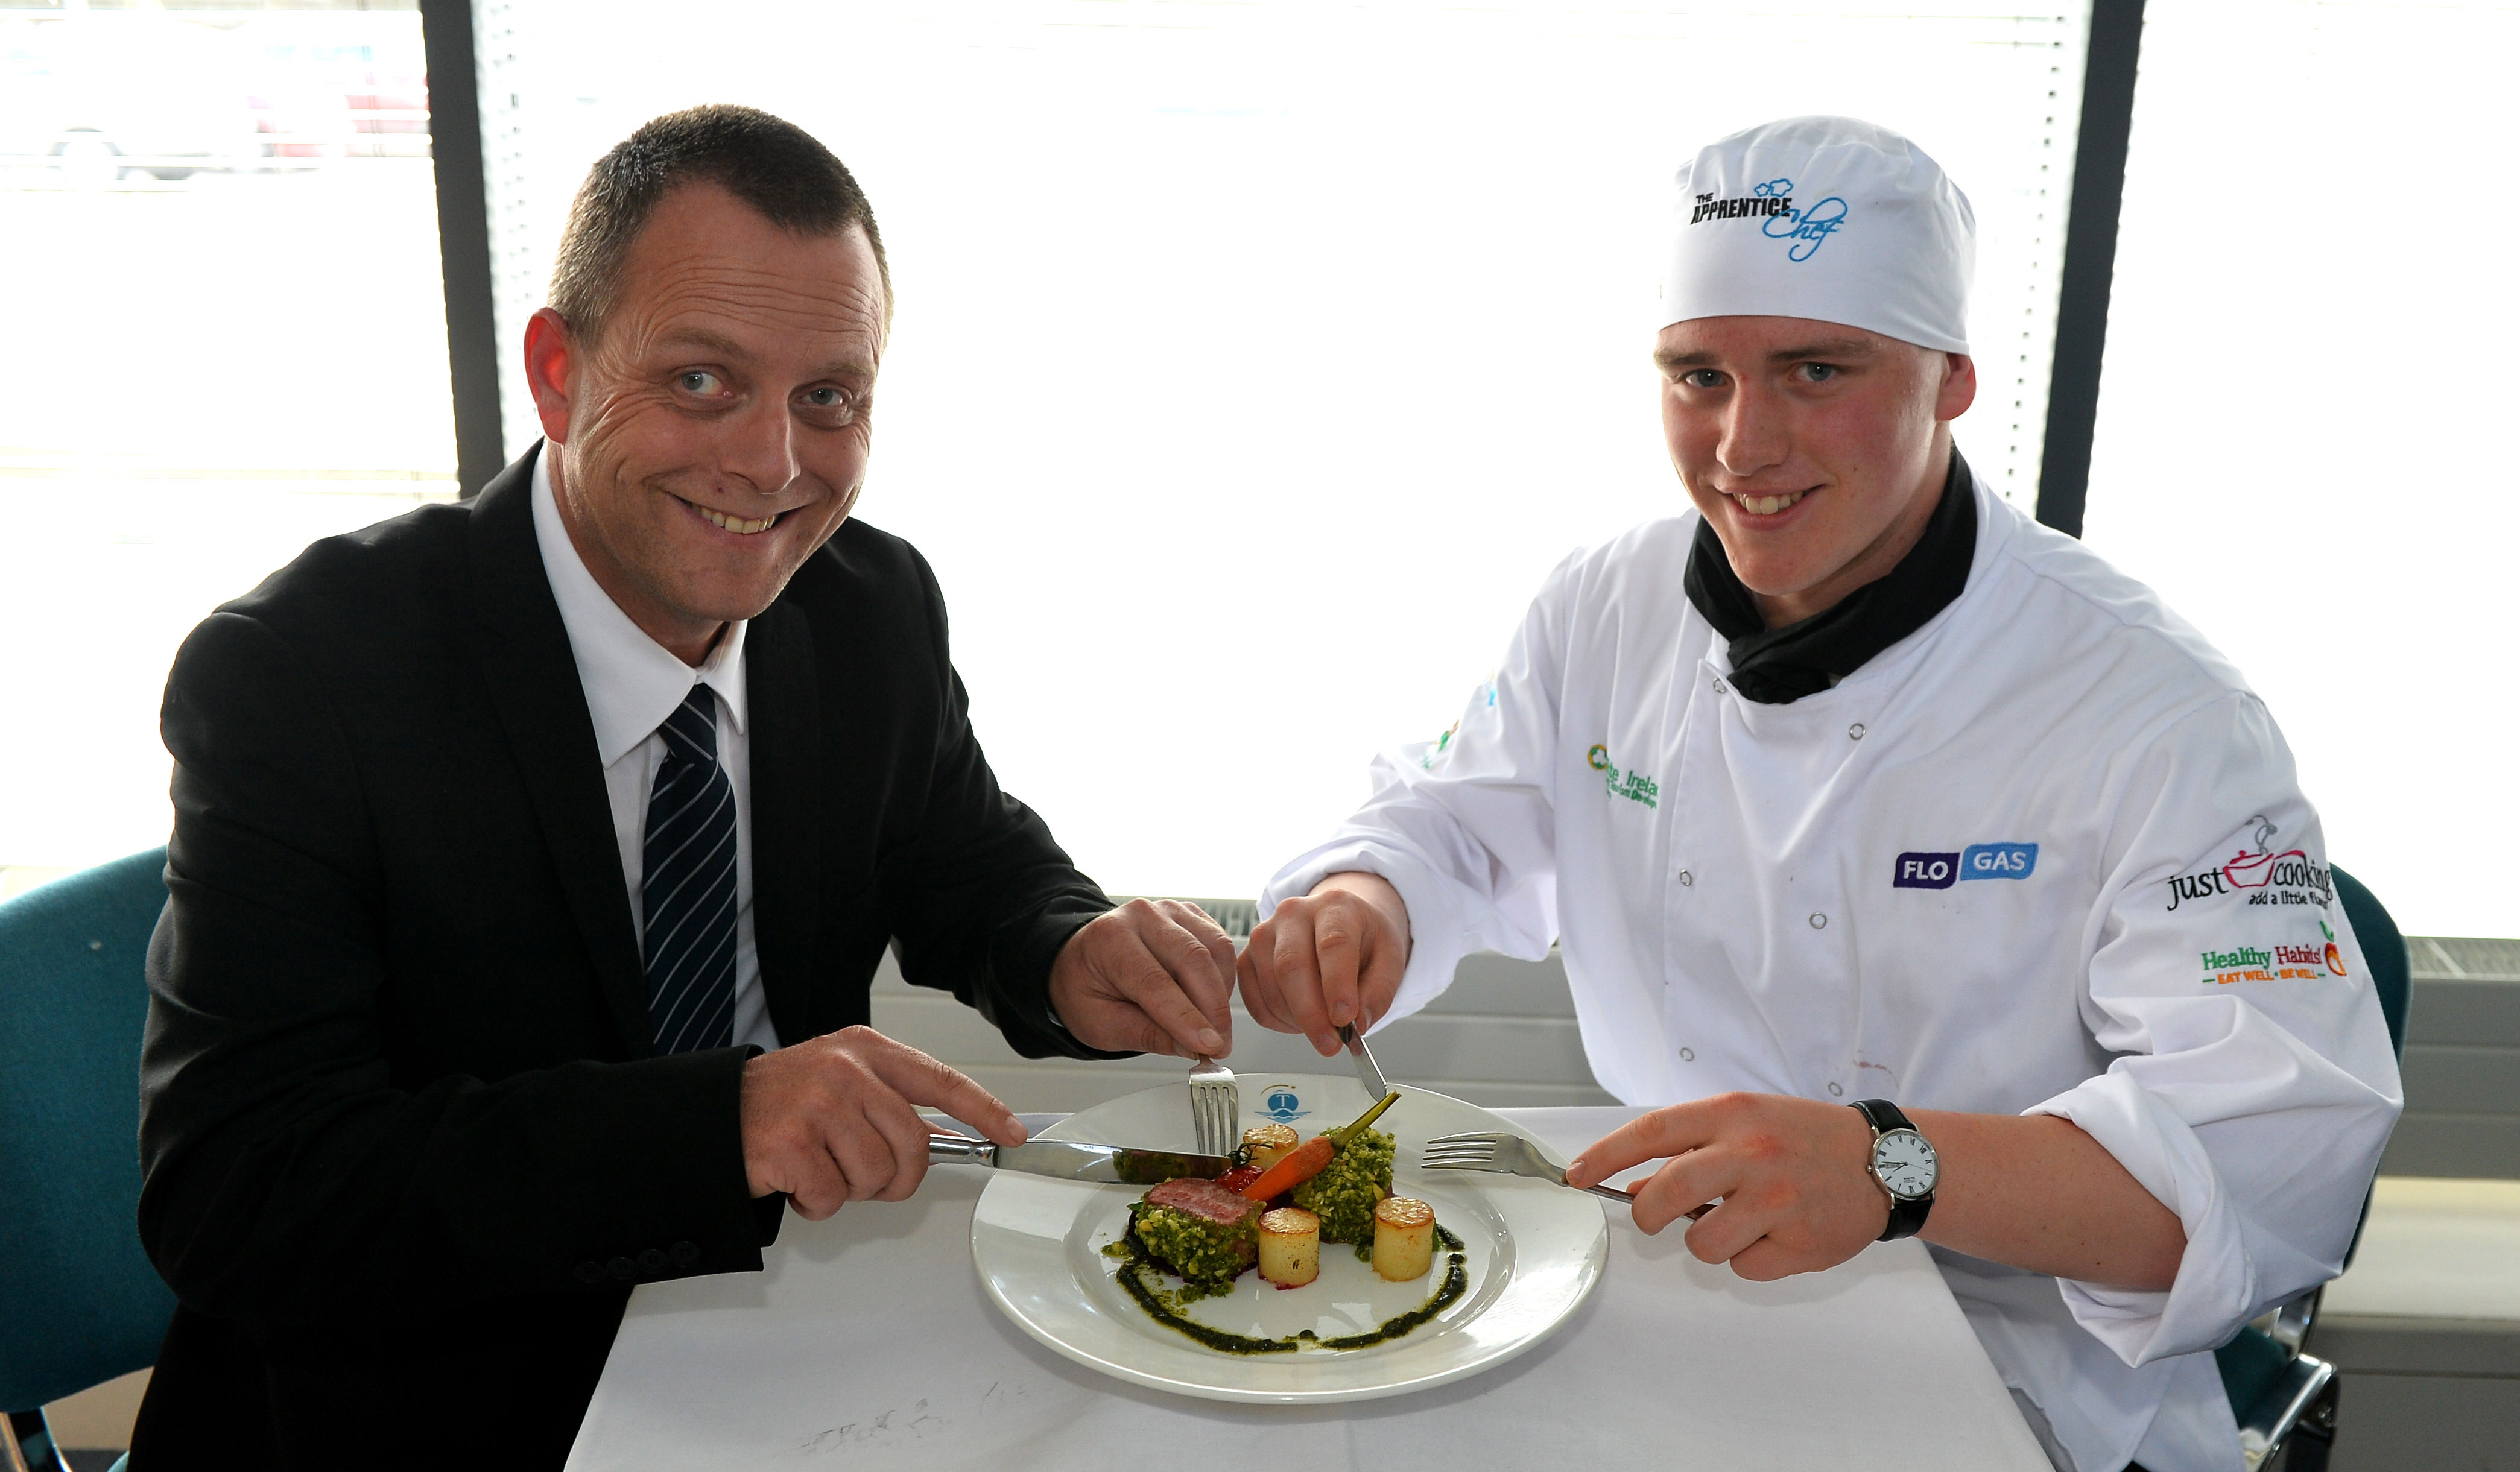 Supreme Apprentice Chef George Hennessy, shares his award winning roast loin of local lamb, red currant jus, fondant potato, beetroot, baby carrots and salsa verde with Flogas Ireland's Michael Murphy at the 2015/16 Apprentice Chef Finale, sponsored by Flogas and Failte Ireland, at the Institute of Technology Tralee on Friday 6 May.  The 16 year old from Dungourney is a student at Midleton College, Cork.